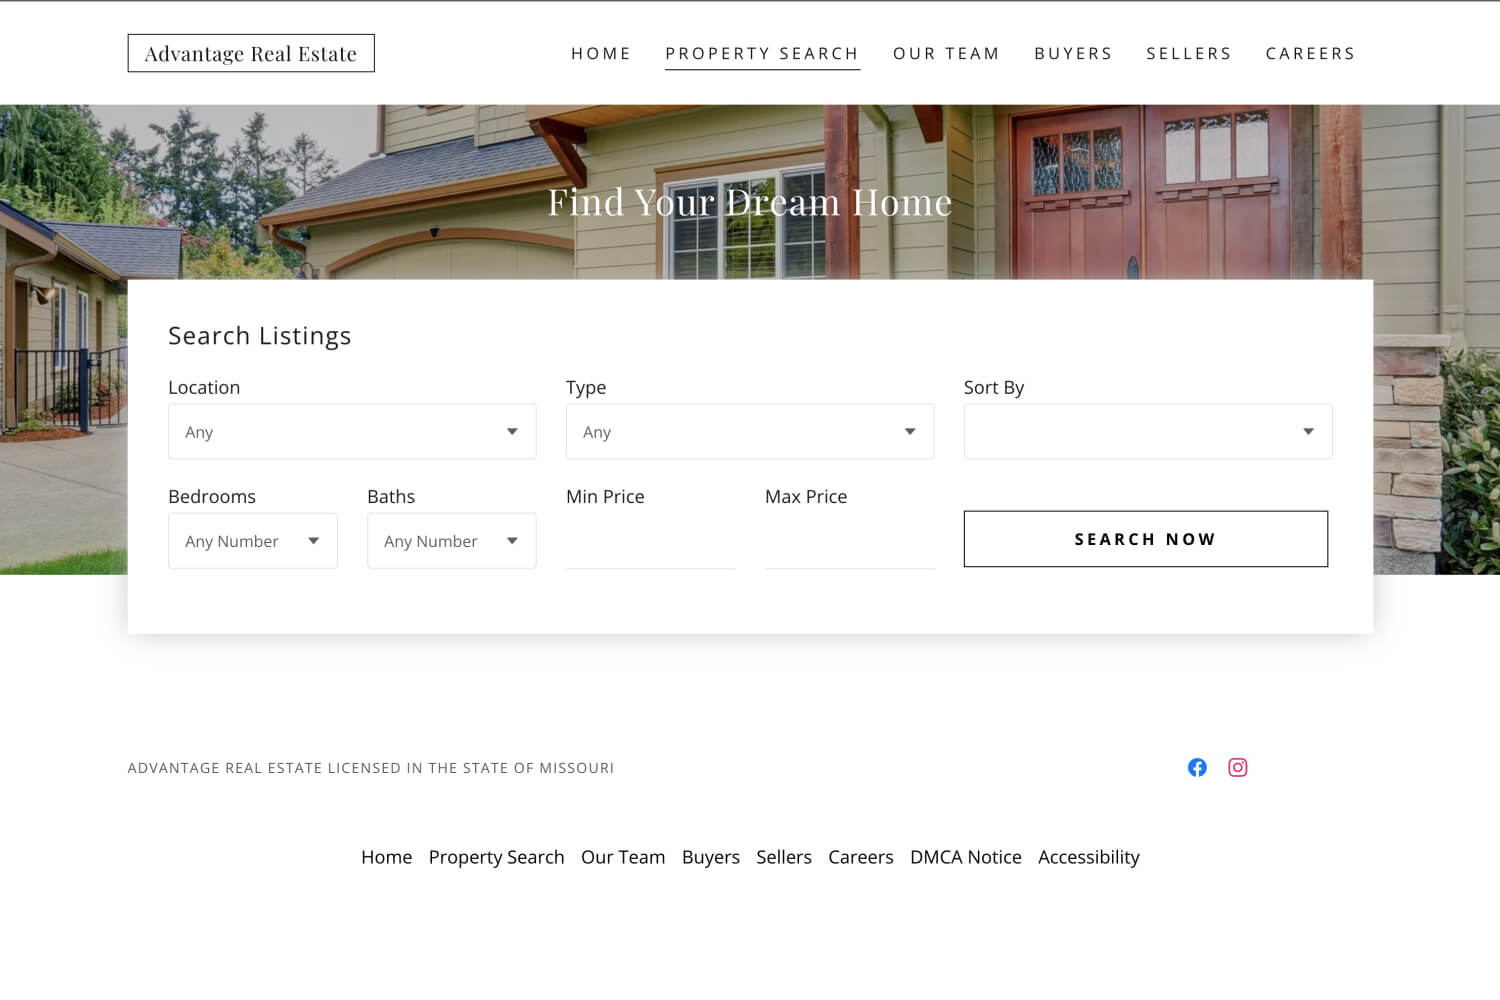 Image Of A Modern Design Of A Real Estate Website With Property Listings